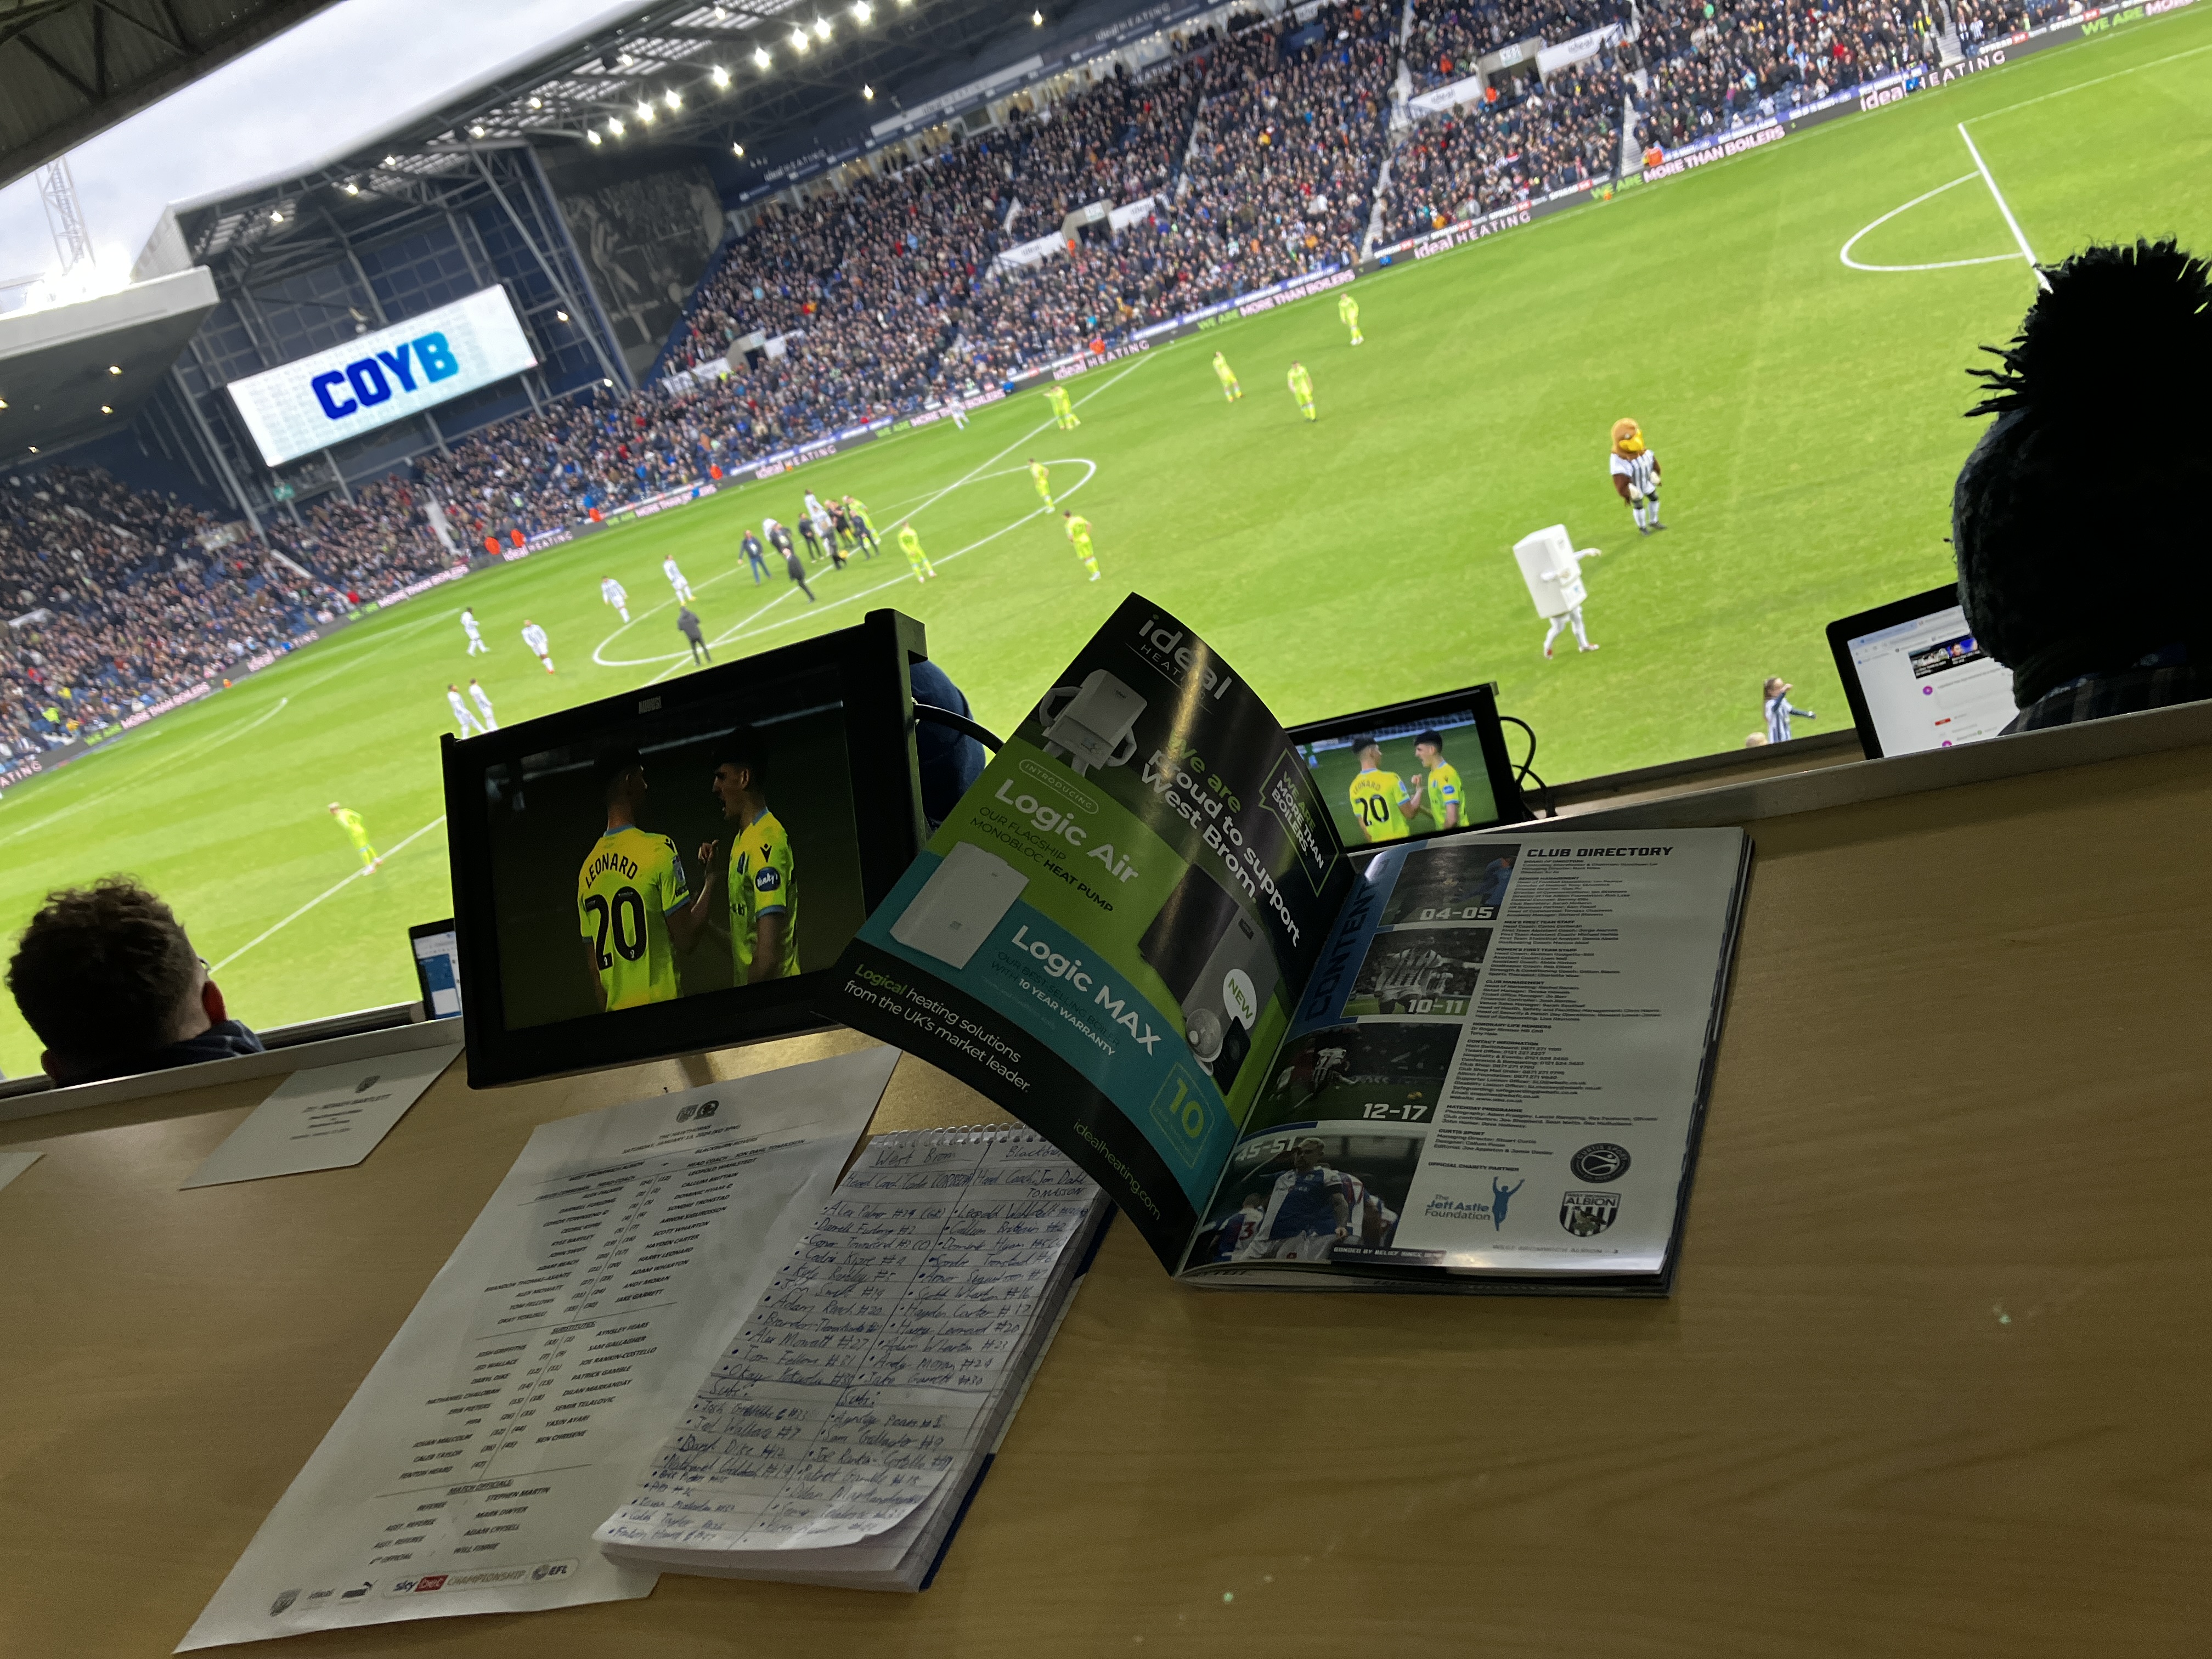 Match report and notes from a Supporter to Reporter pupil